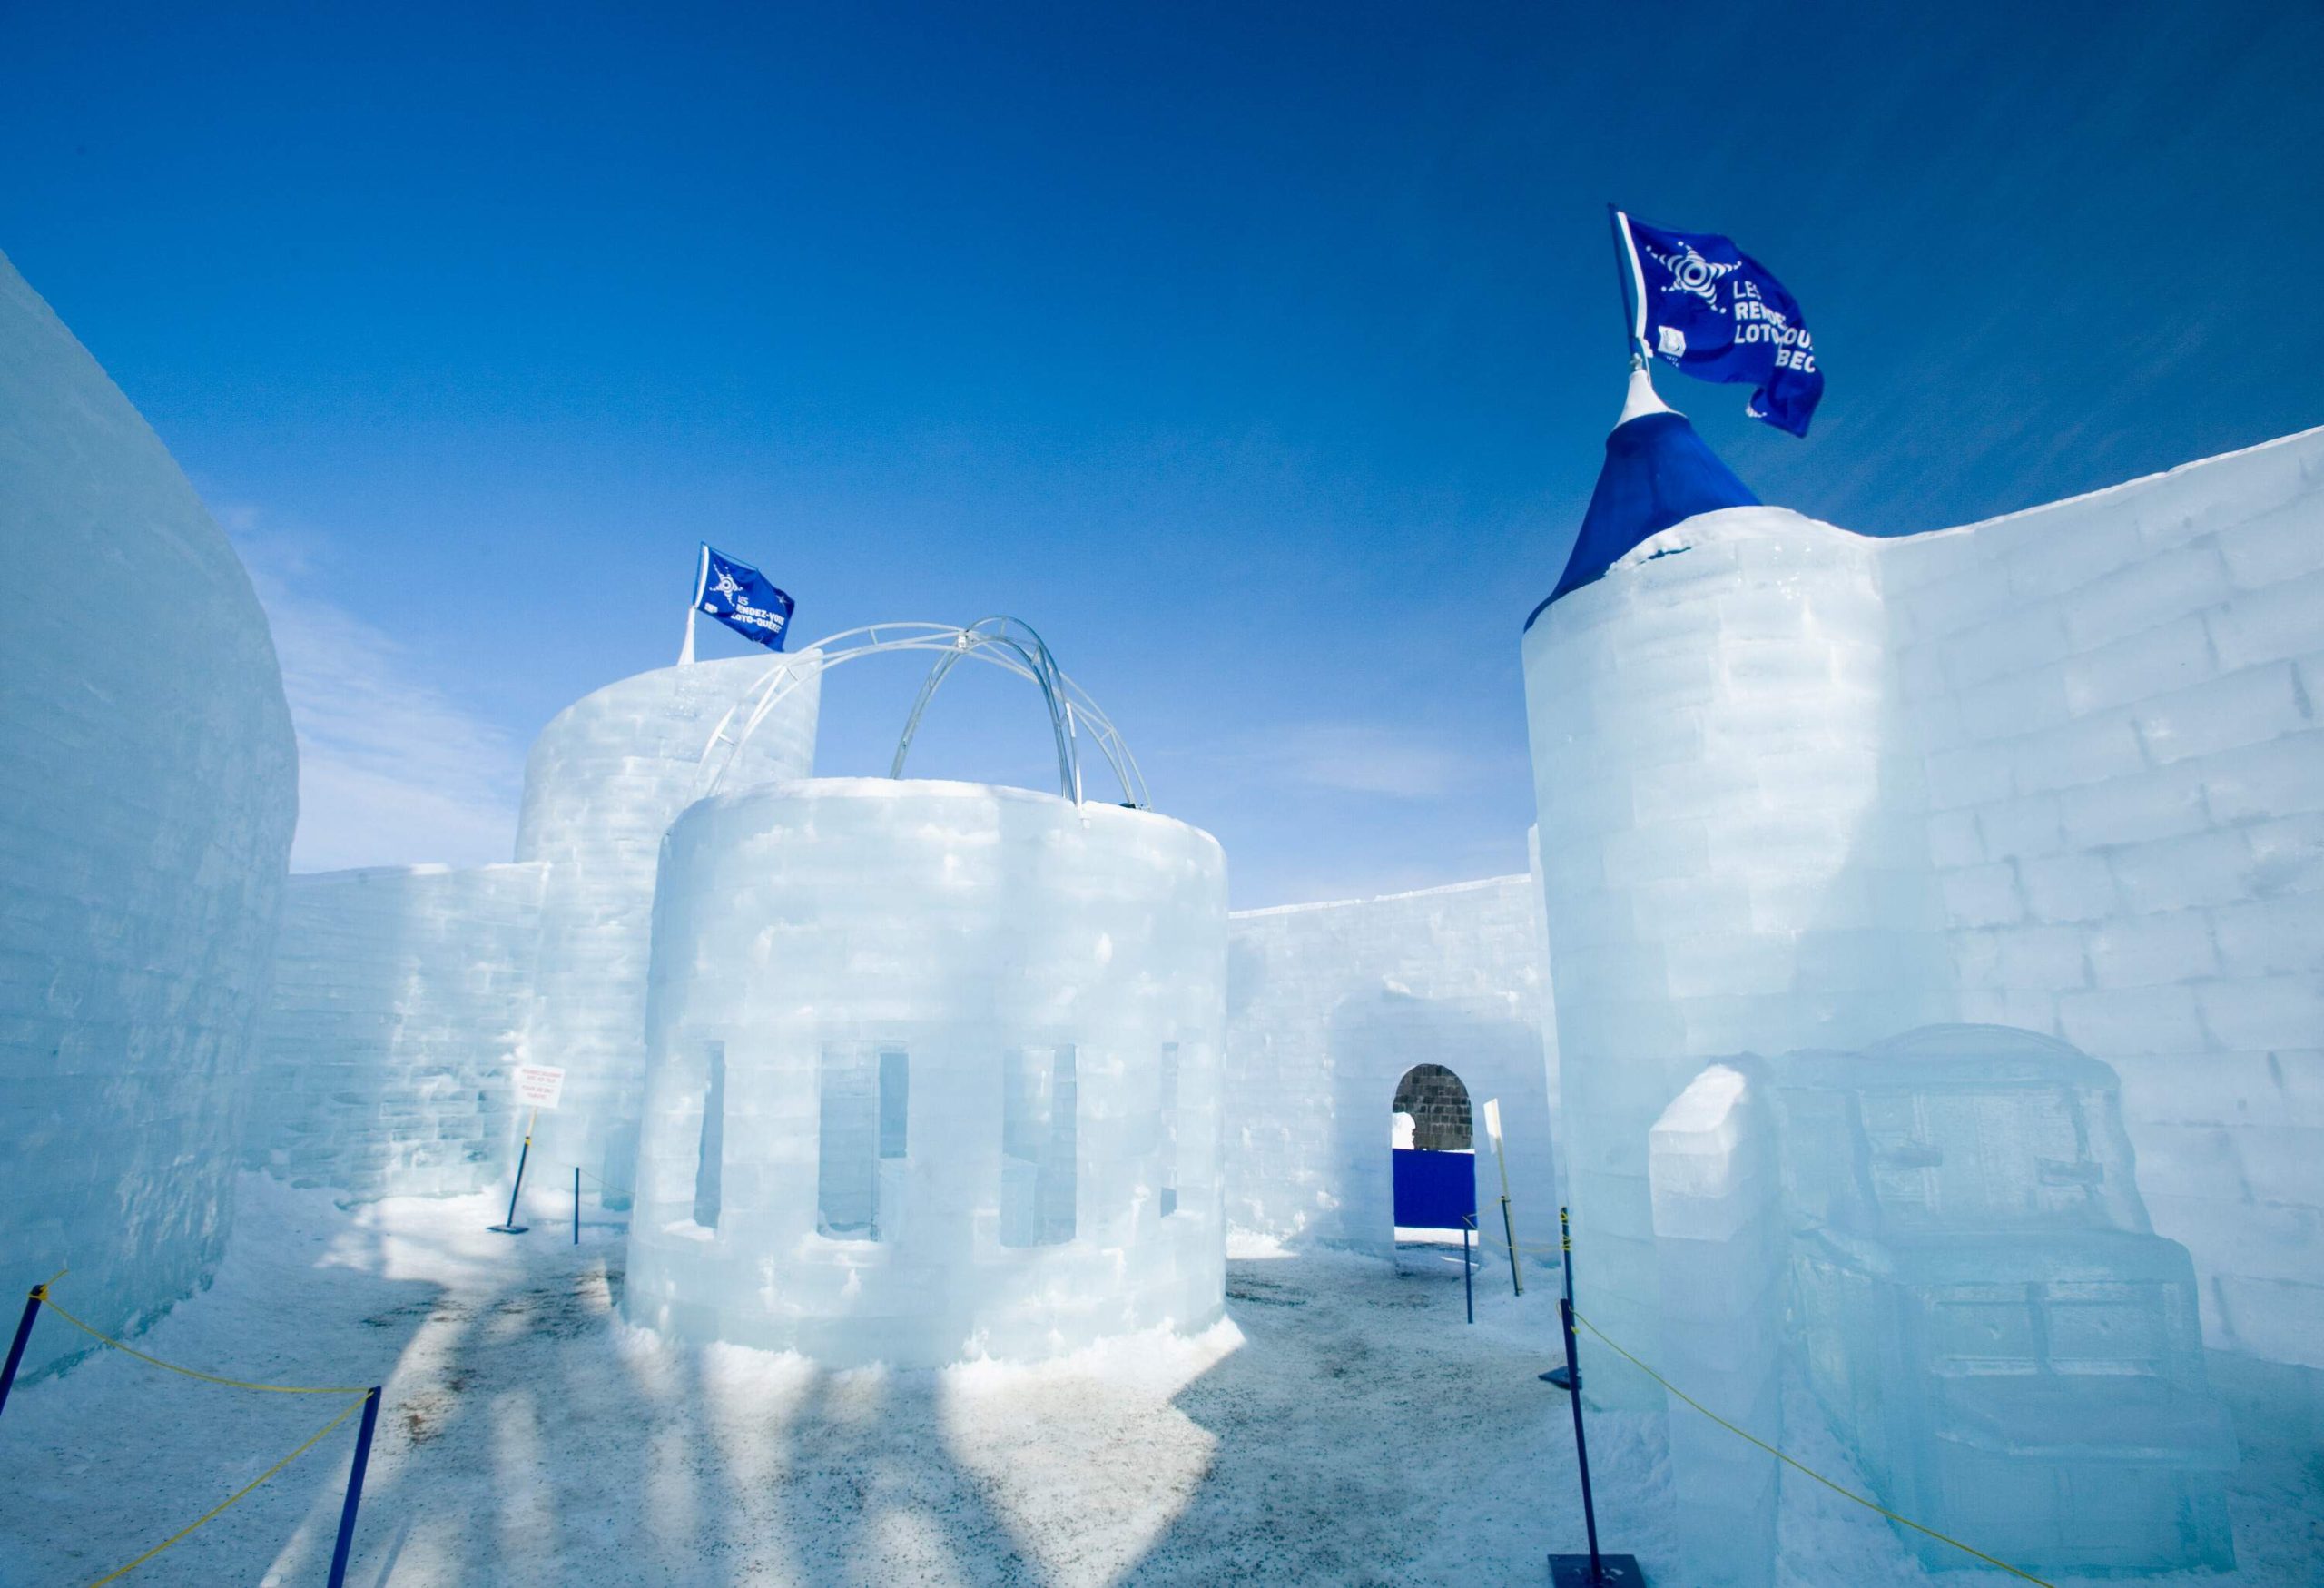 DEST_CANADA_QUEBEC_CITY_WINTER-CARNIVAL_ICE-SCULPTURES_GettyImages-75462032